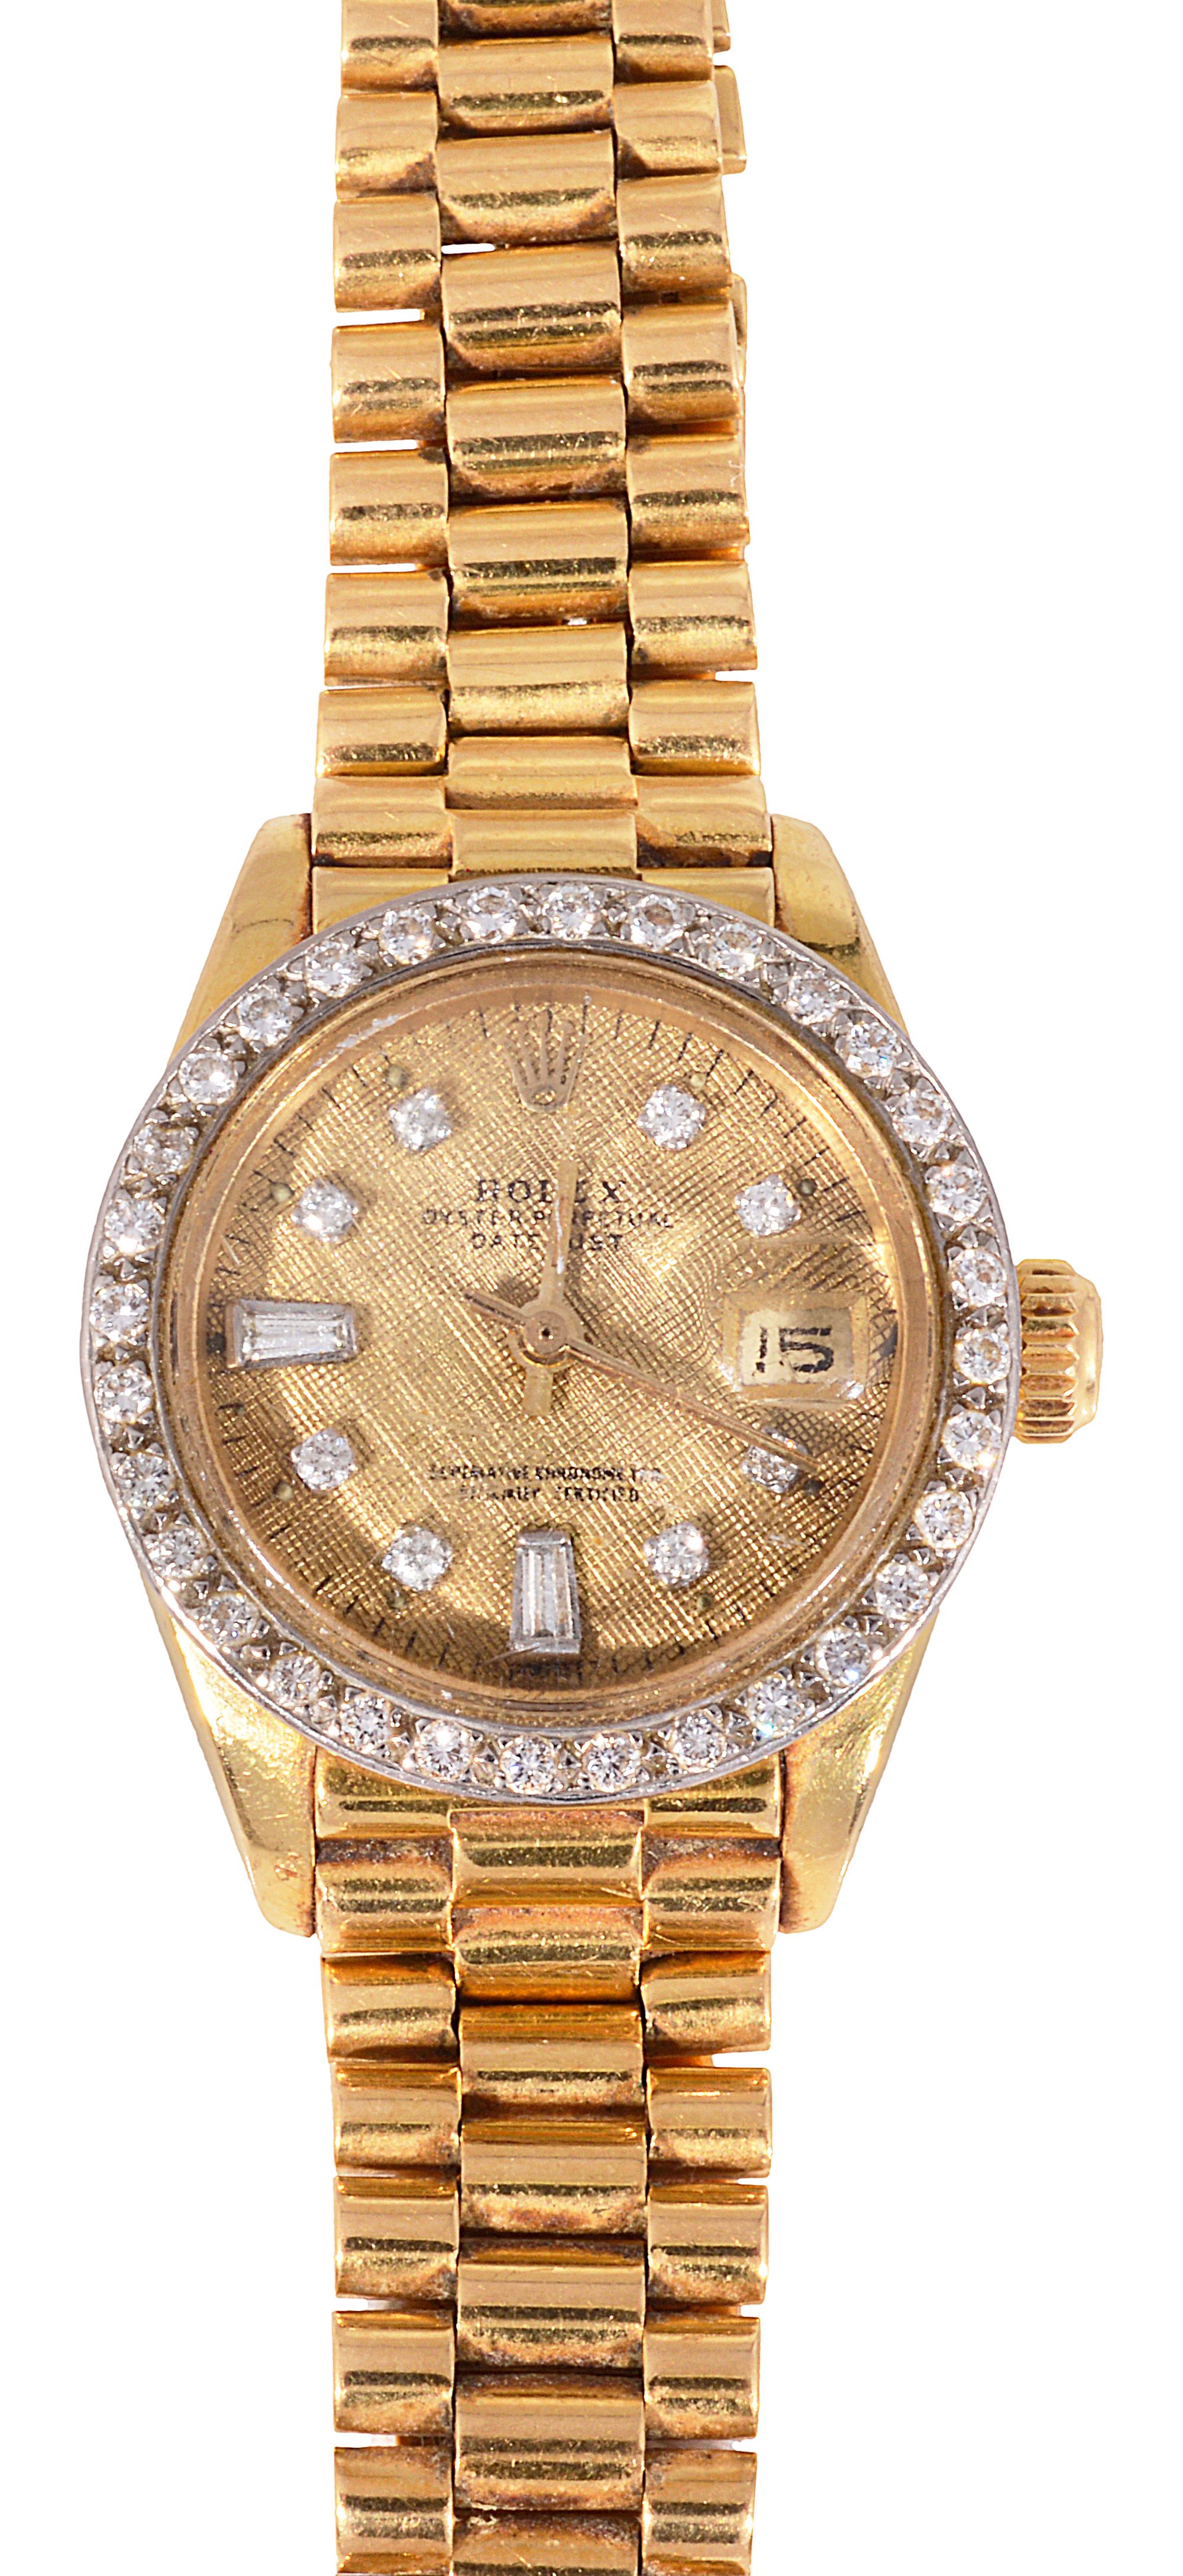 A lady's gold and diamond Rolex Oyster Watch